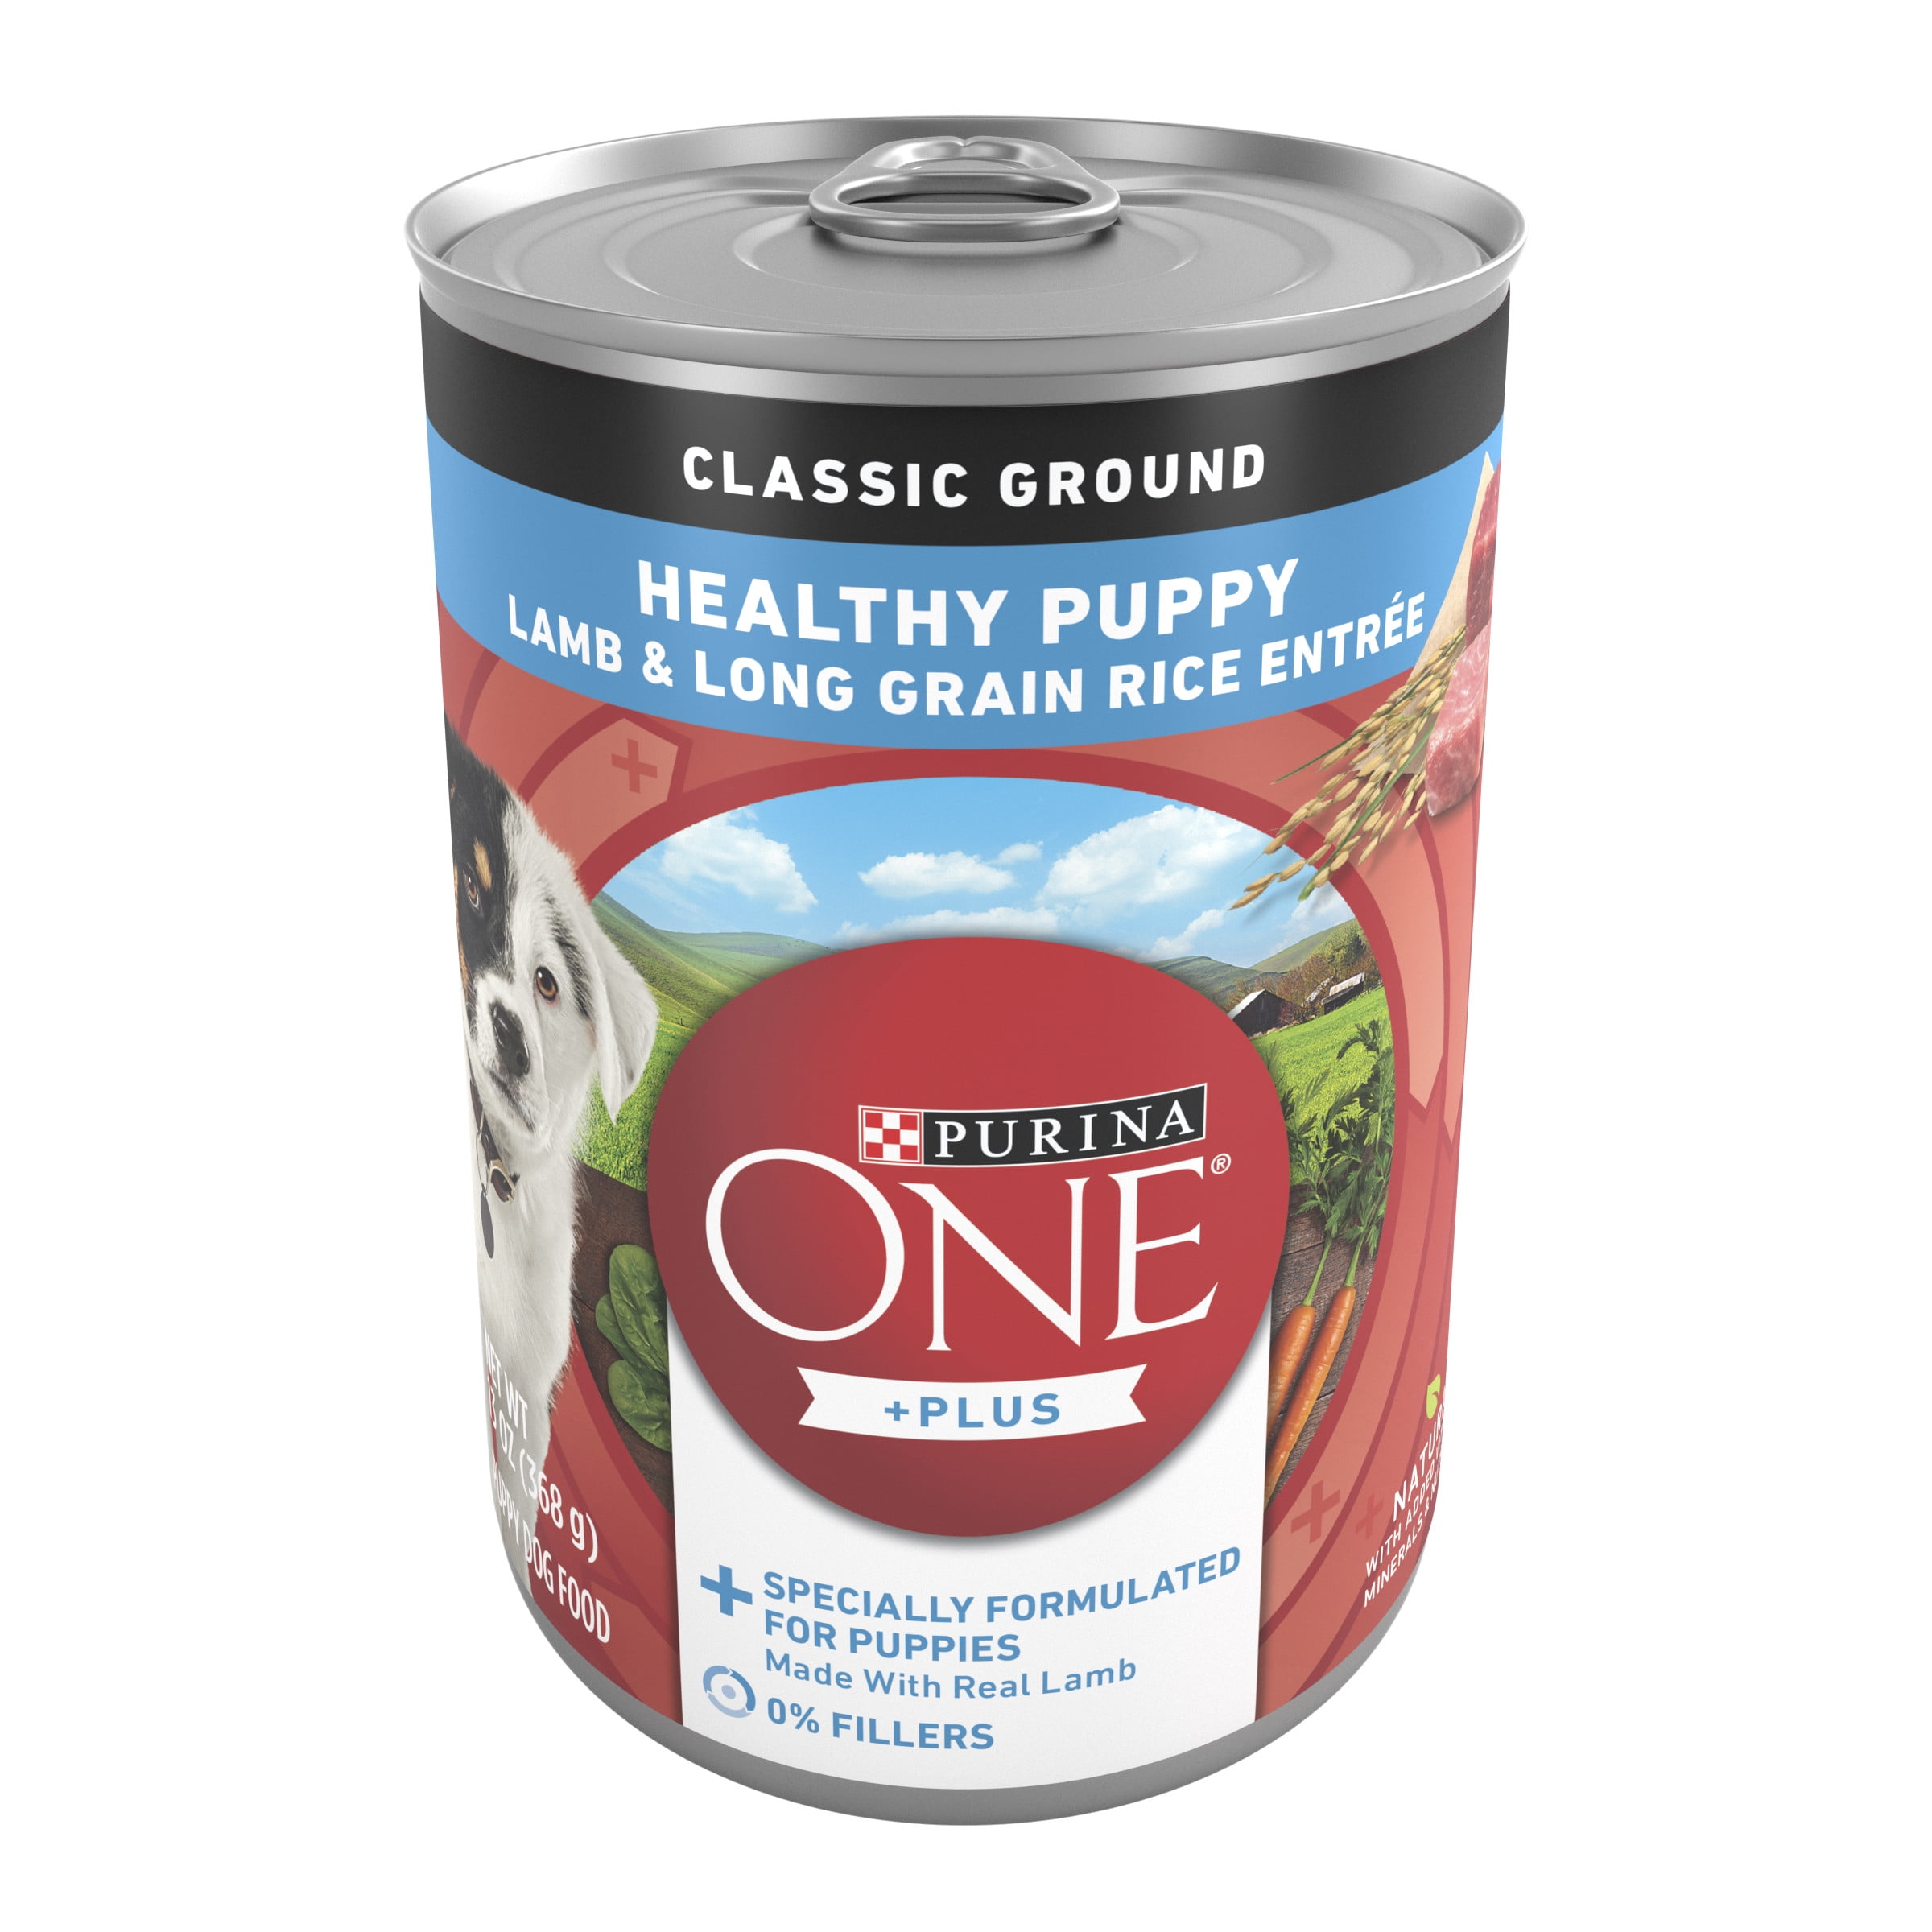 Purina ONE +Plus Lamb & Long Grain Rice Wet Puppy Dog Food, 13 oz Can